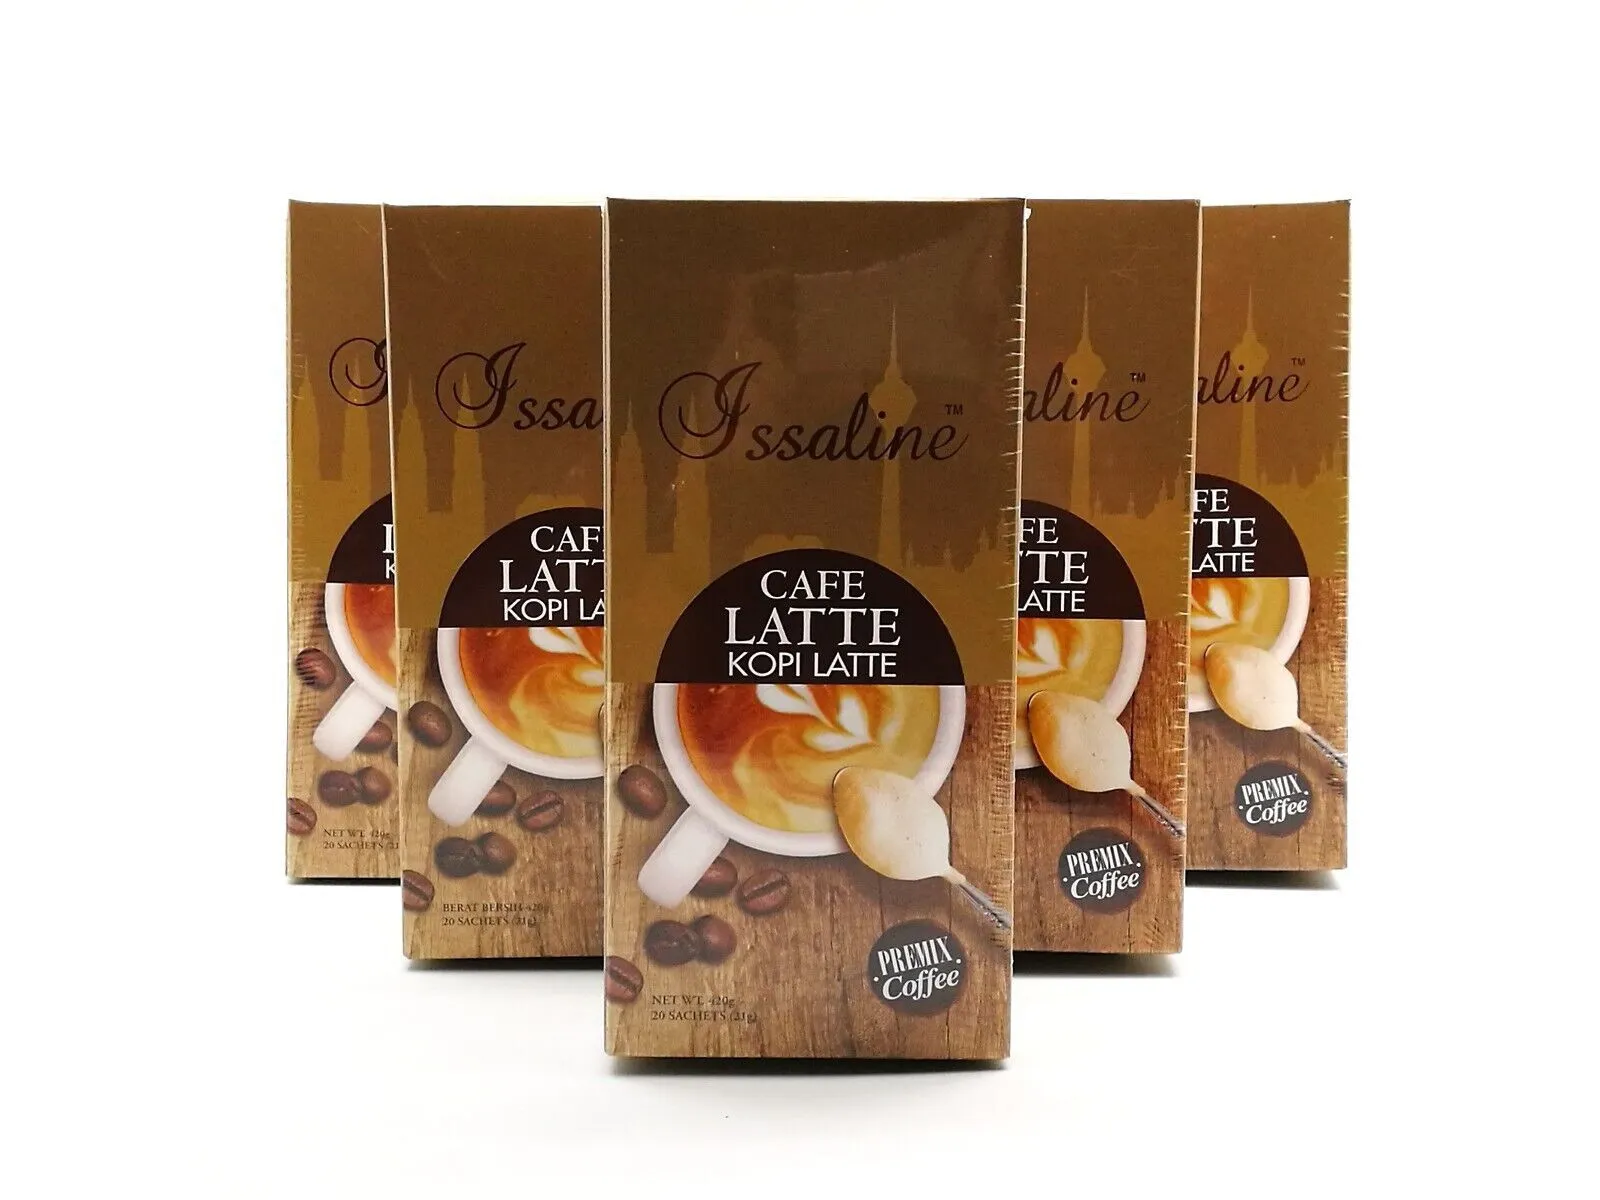 20 Boxes X Issaline Gourmet Cafe Latte 100% Ganoderma Lucidum Extract Co... - $619.00